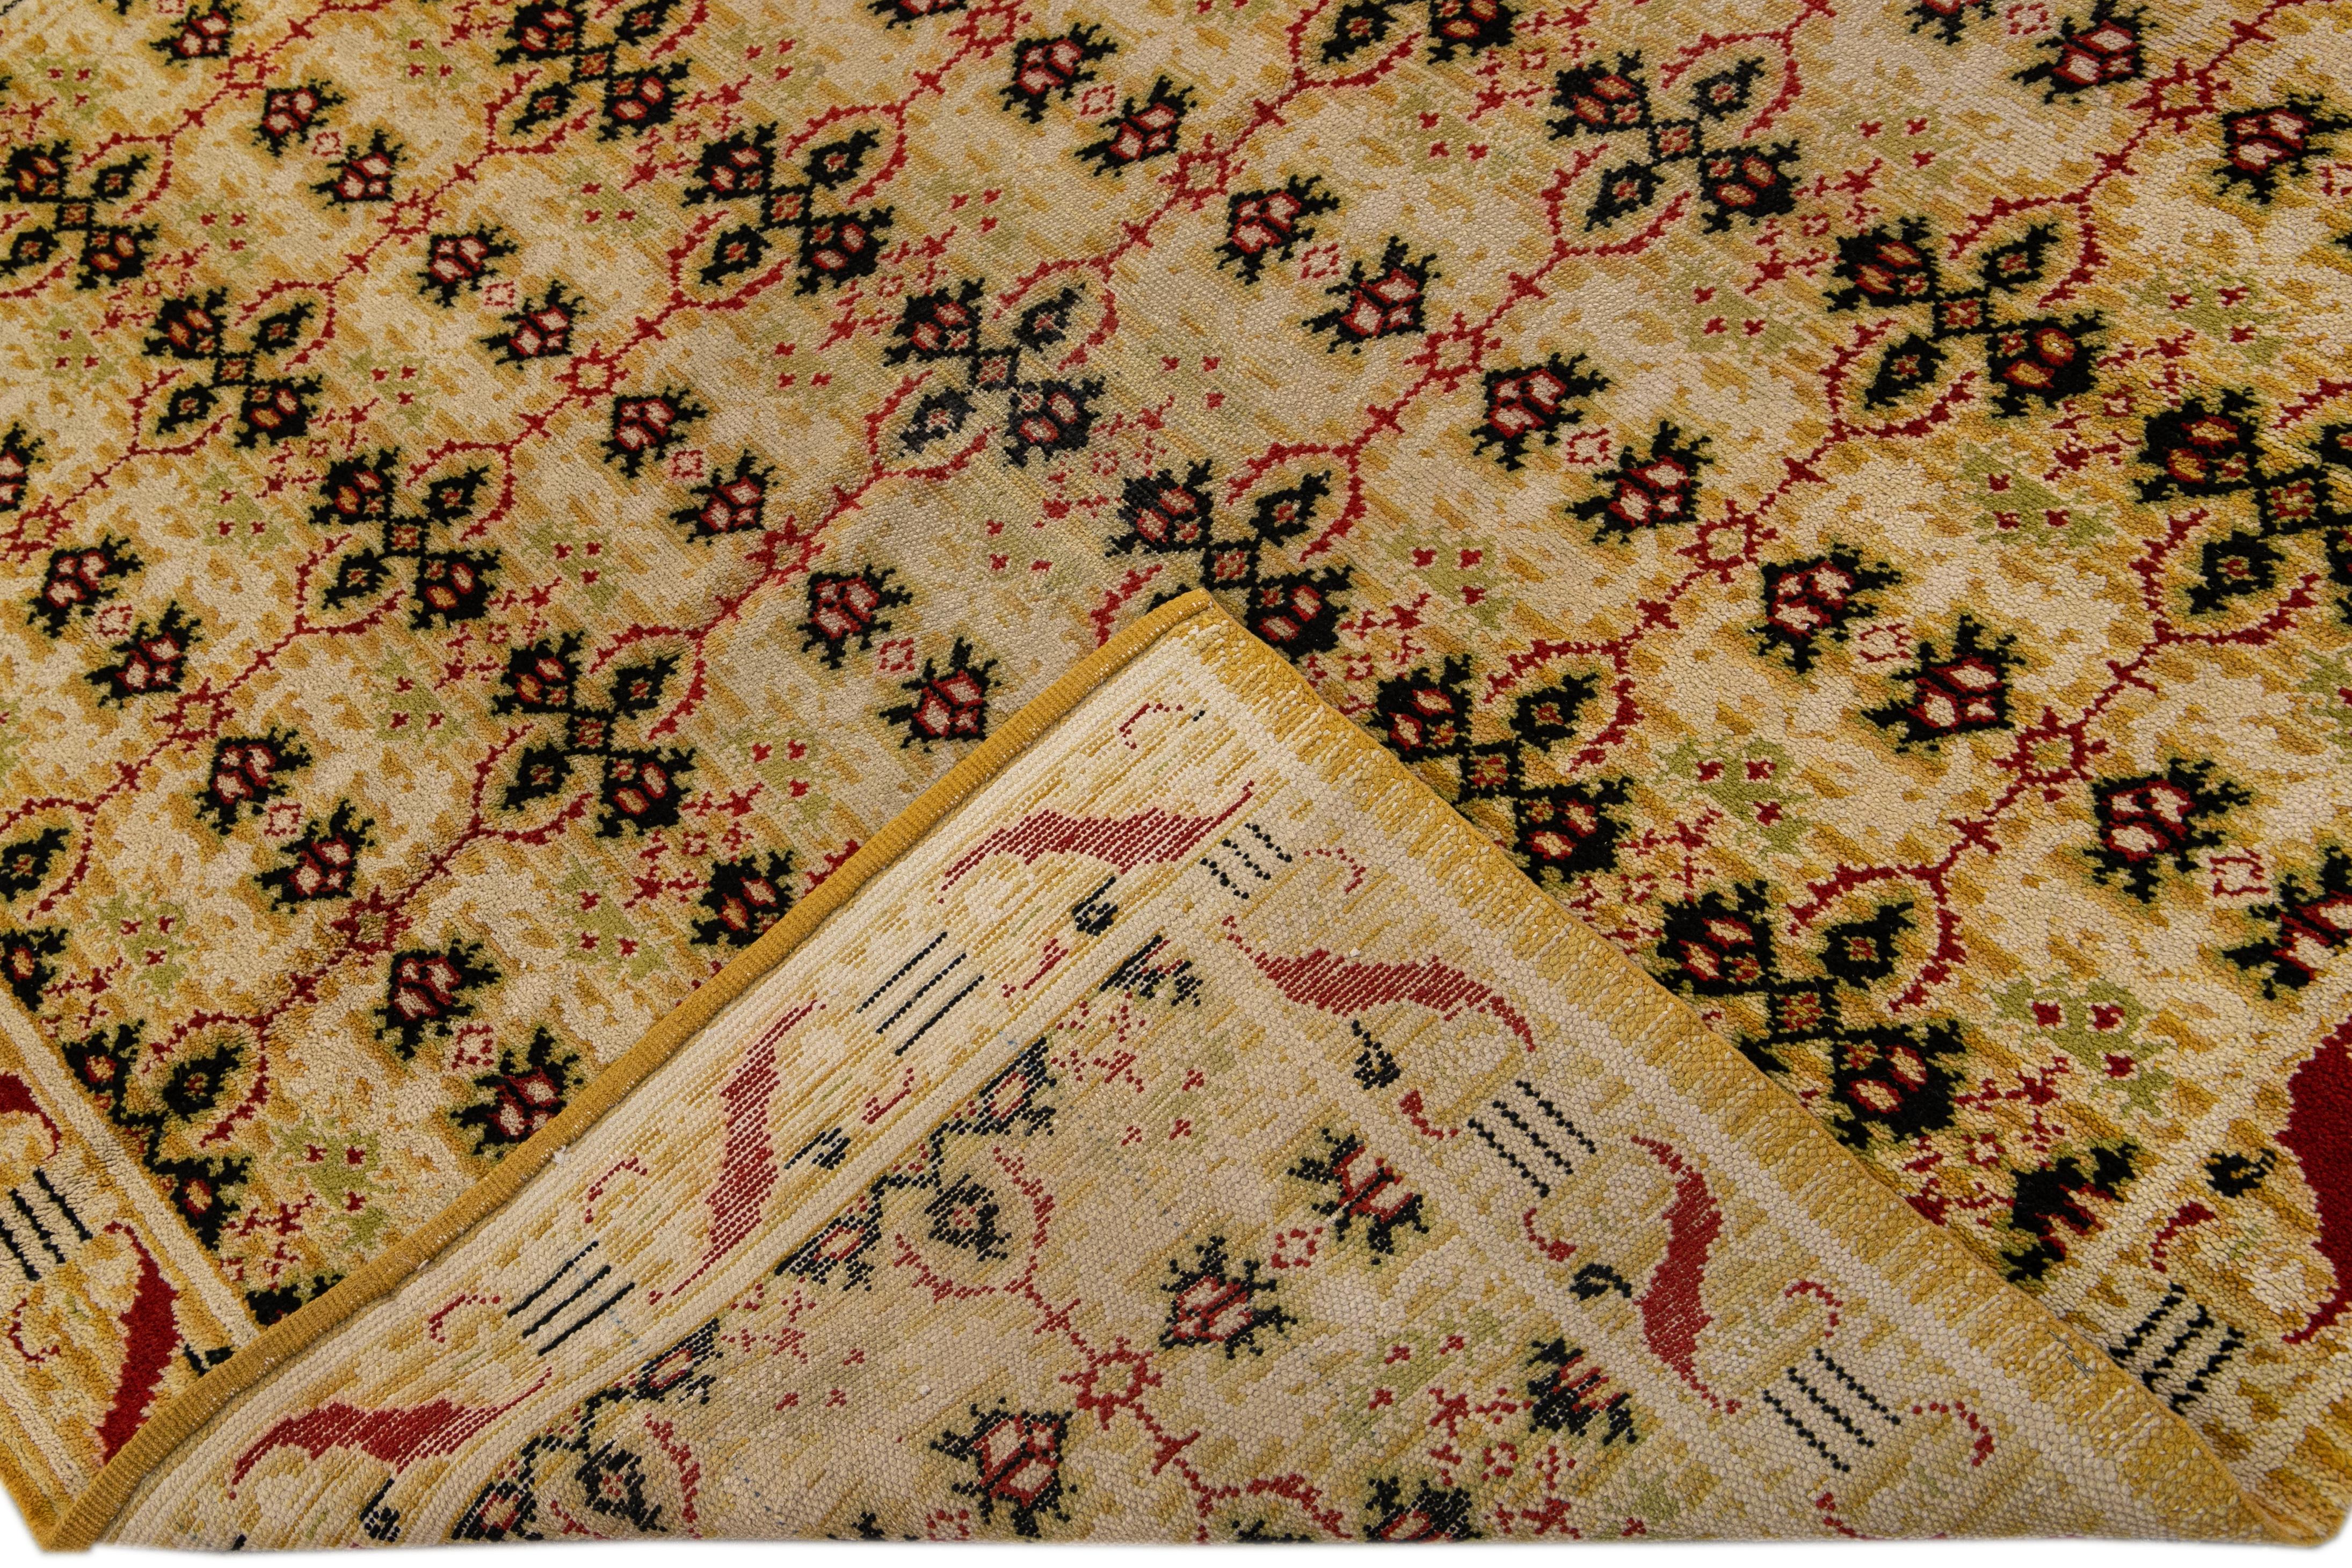 Beautiful vintage Spanish hand-knotted wool rug with the beige and goldenrod field. This Spanish rug has green and red accents in an all-over geometric pattern design. 

This rug measures 6'5